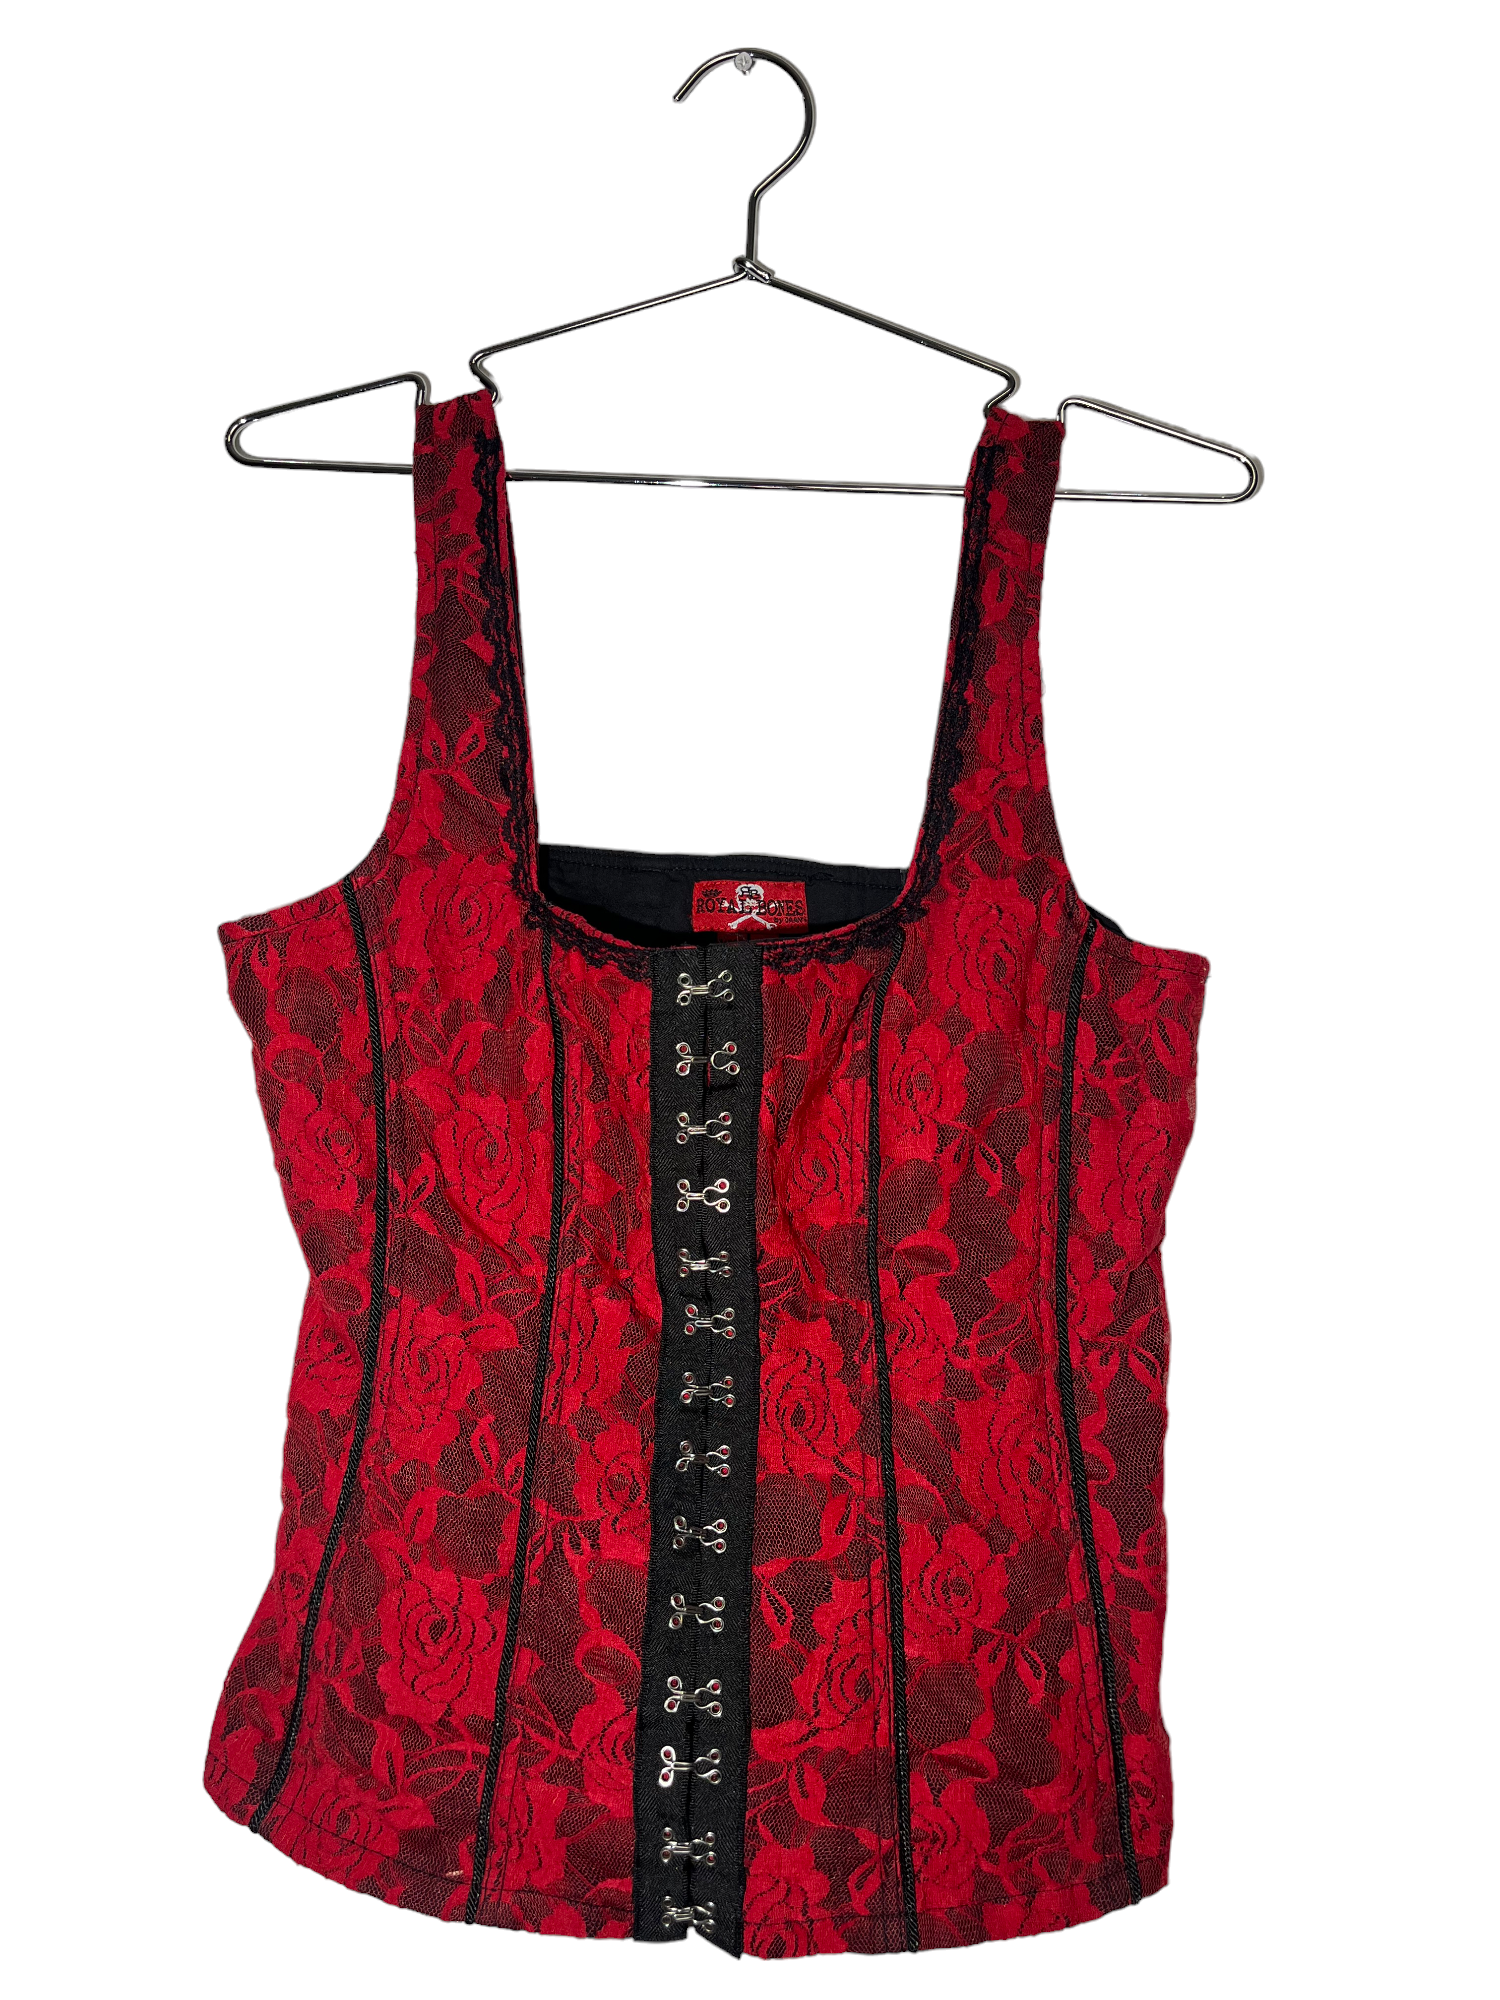 Red & Black Lace Corset Tank